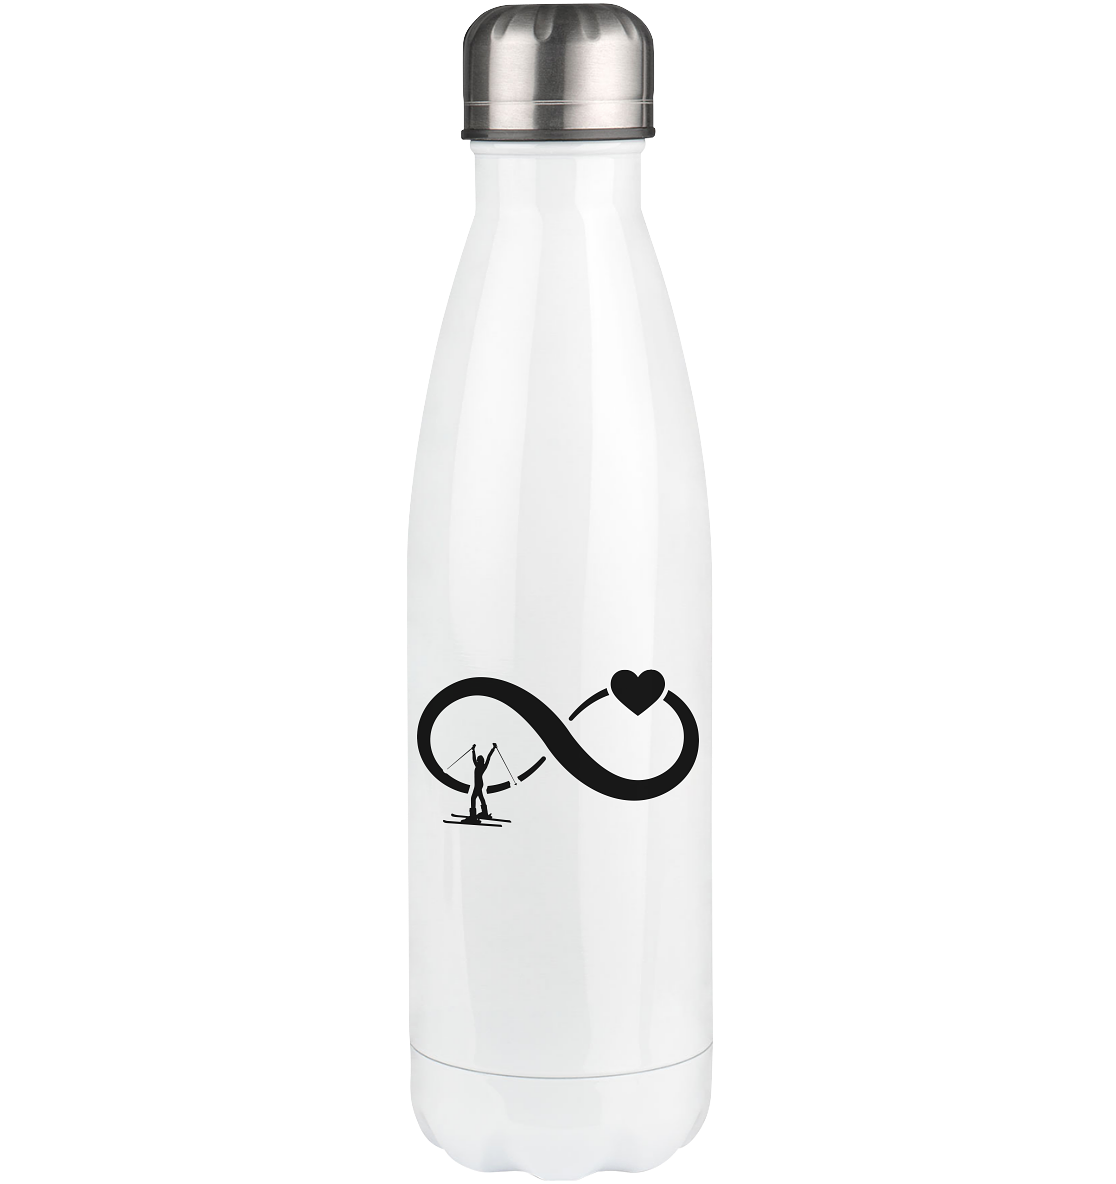 Infinity Heart and Skiing 1 - Edelstahl Thermosflasche klettern ski 500ml